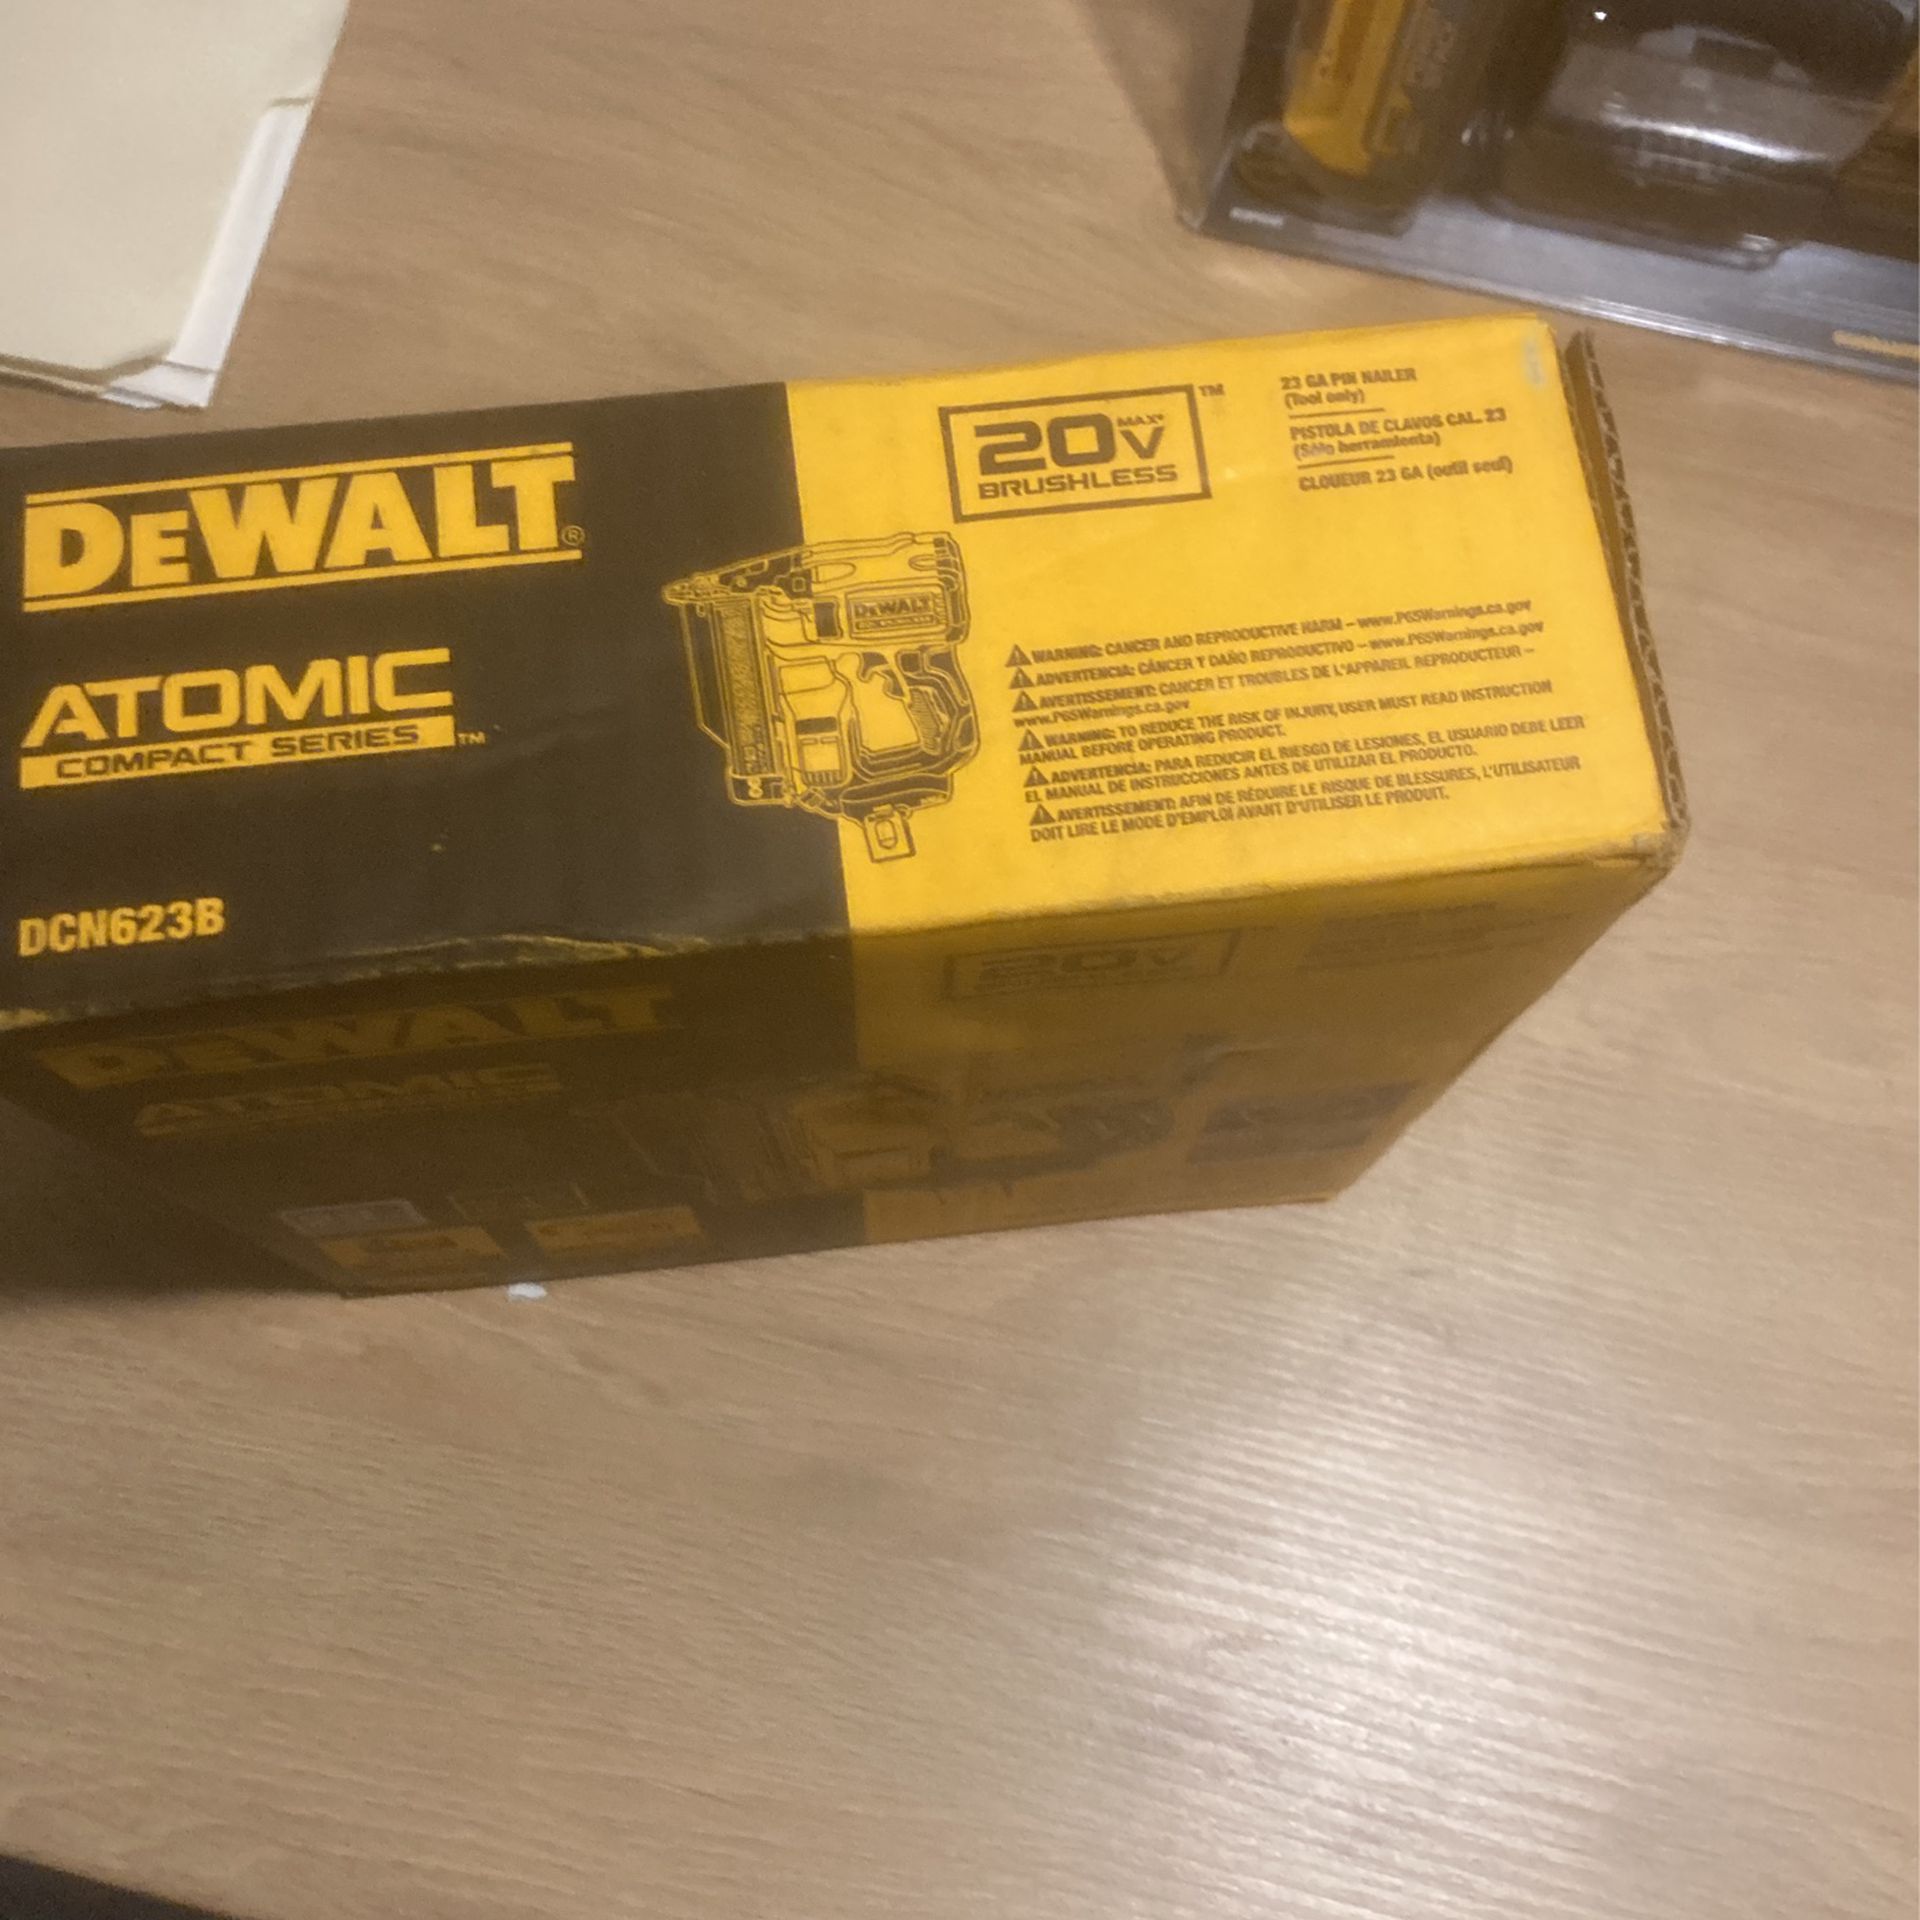 DeWalt Atomic Compact 20v Brushless Nail Gun DCN623B for Sale in Charlotte,  NC OfferUp